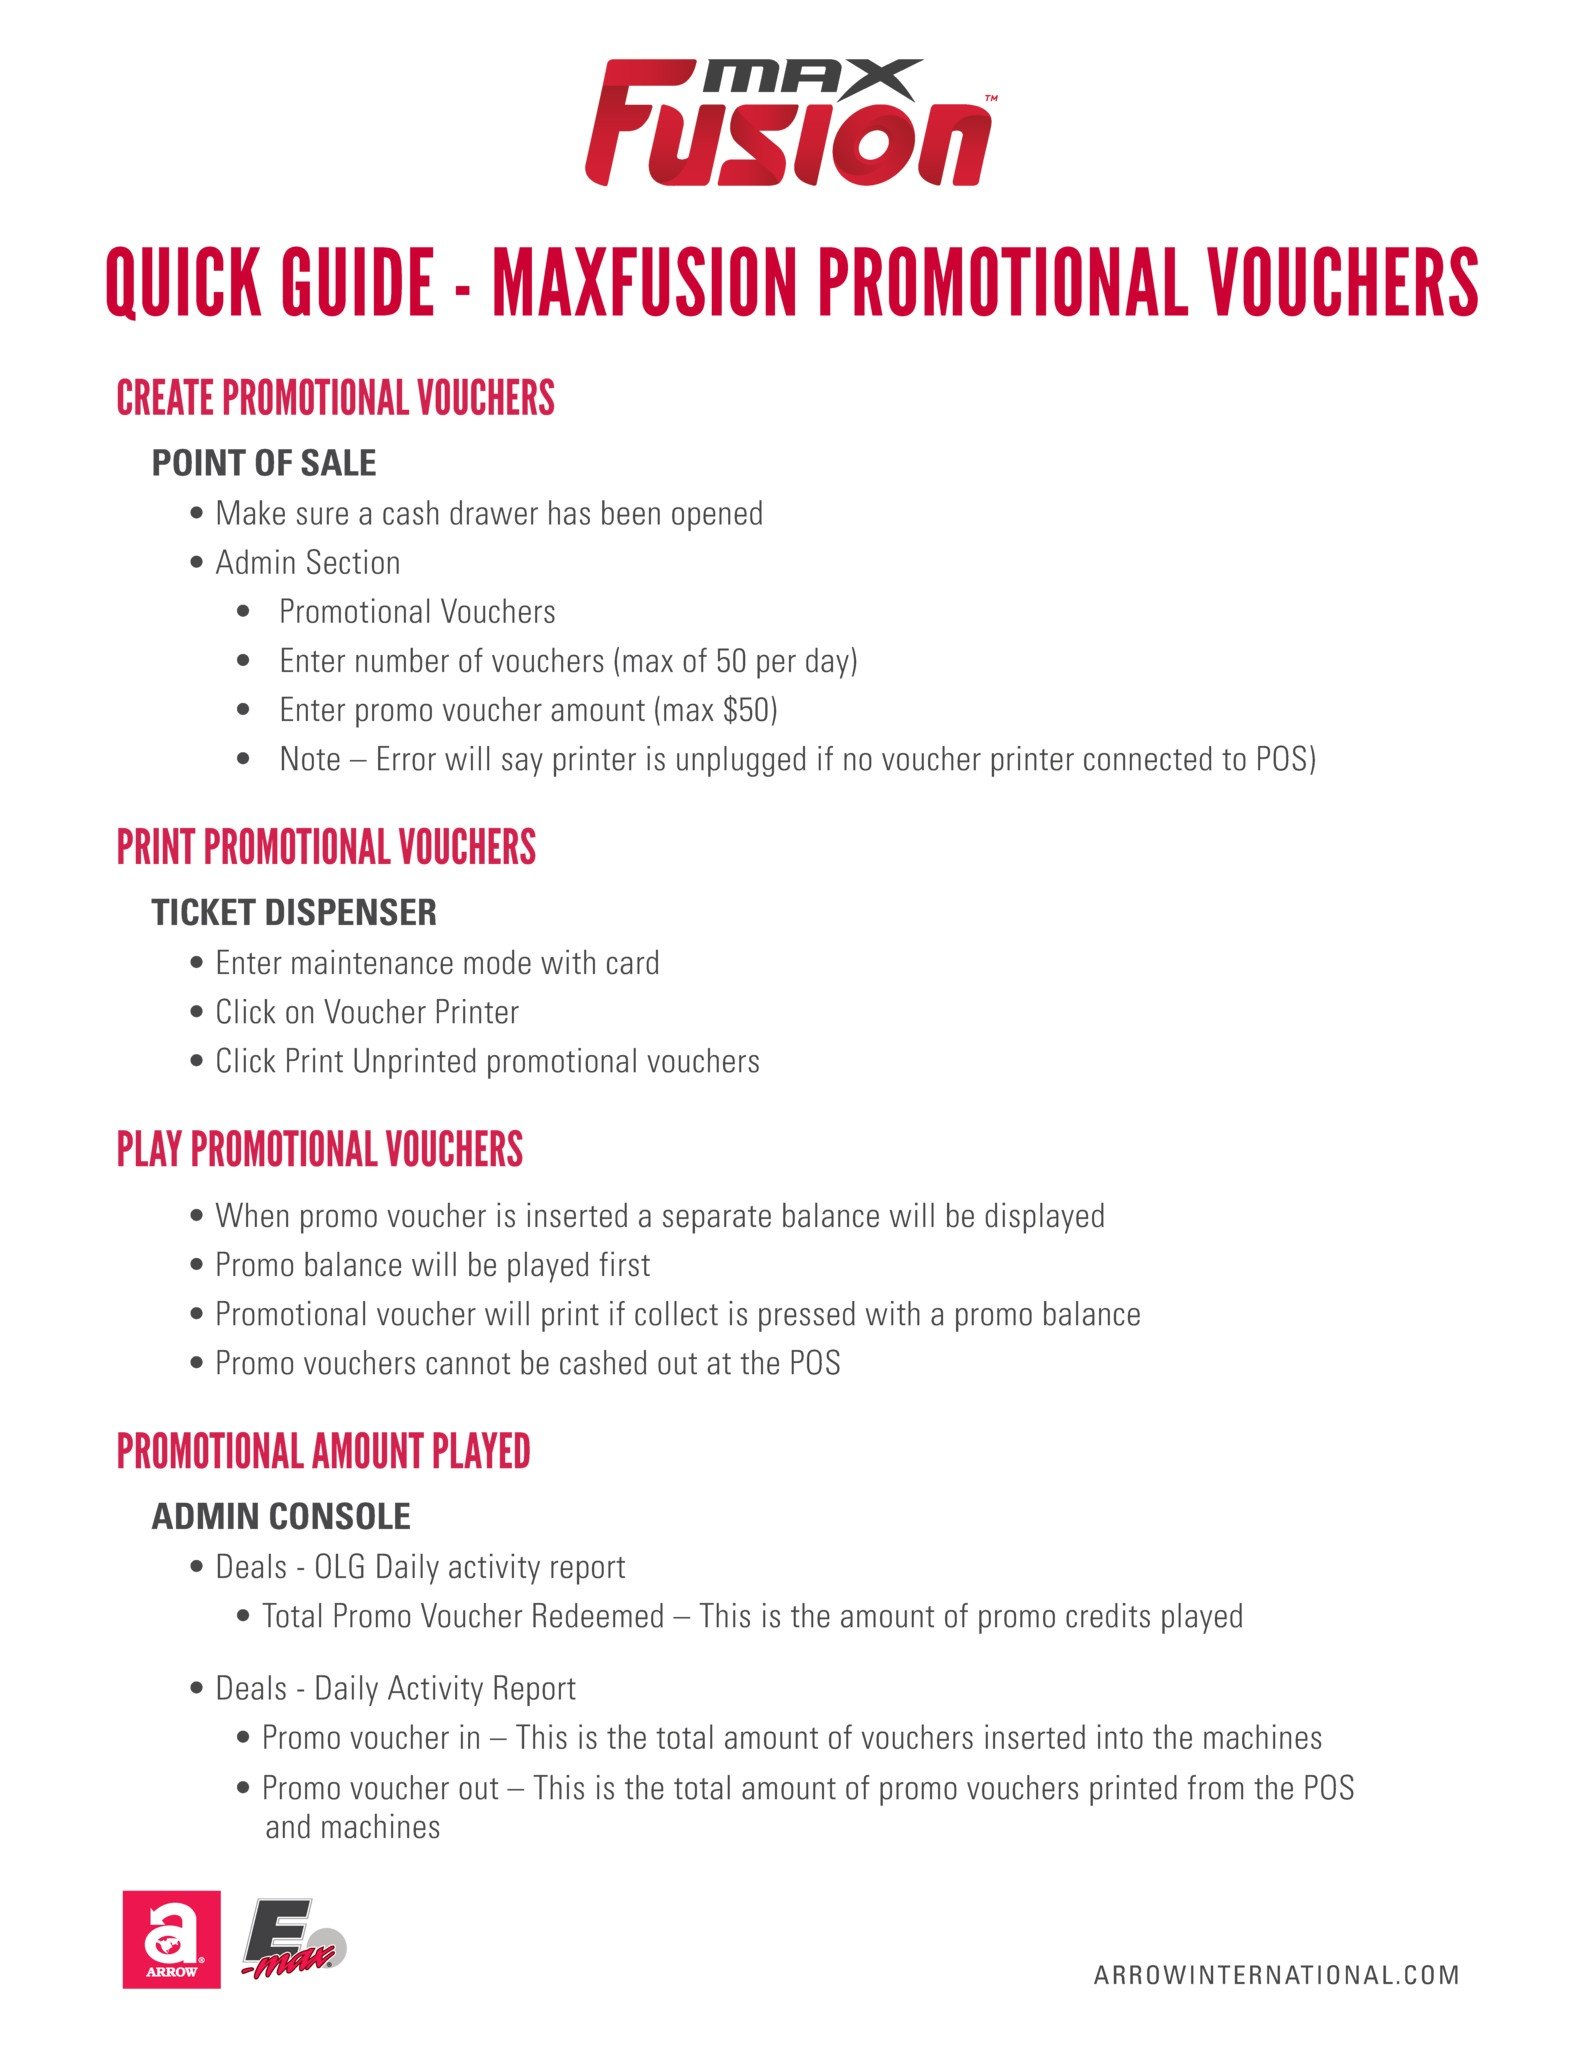 Maxfusion Promotional Vouchers Quick Guide  Equipment Manuals/Quick Start Guides